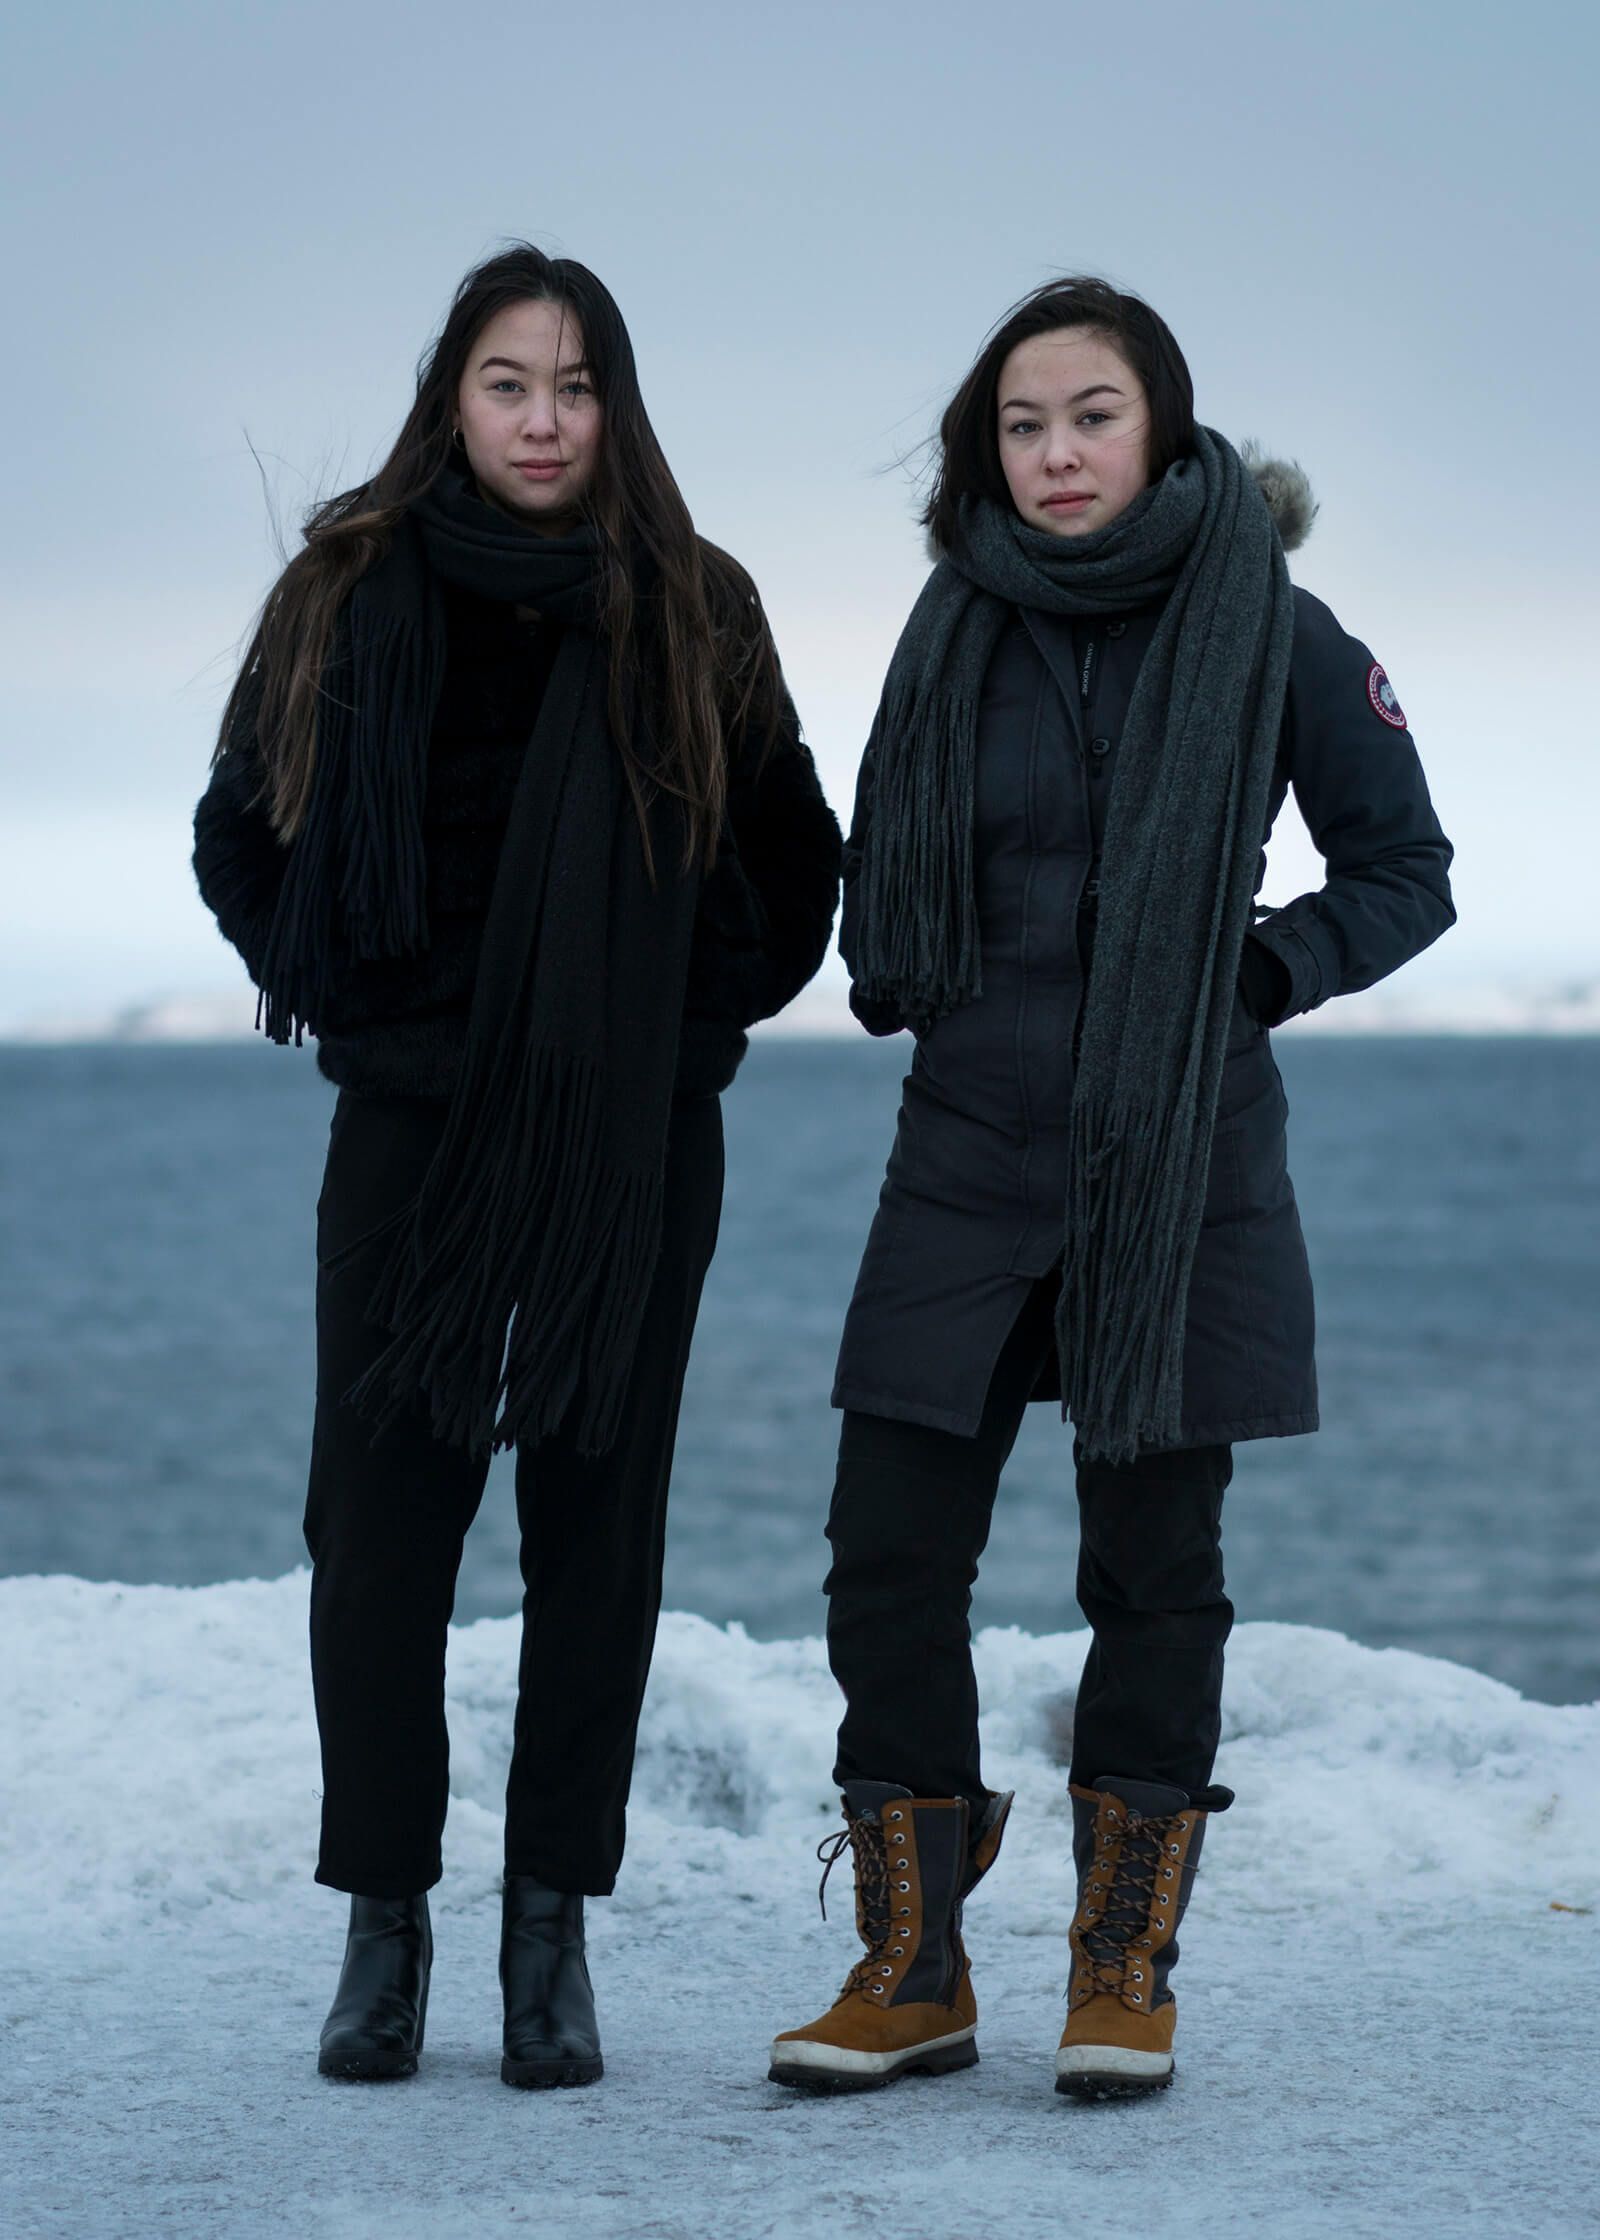 Sixteen-year-old twins Sara and Stina Olsvig plan to study abroad for a year in Denmark, Many of the students who study abroad don't return to Greenland. Image by Jonas Bendiksen/Magnum Photos. Greenland, 2018.